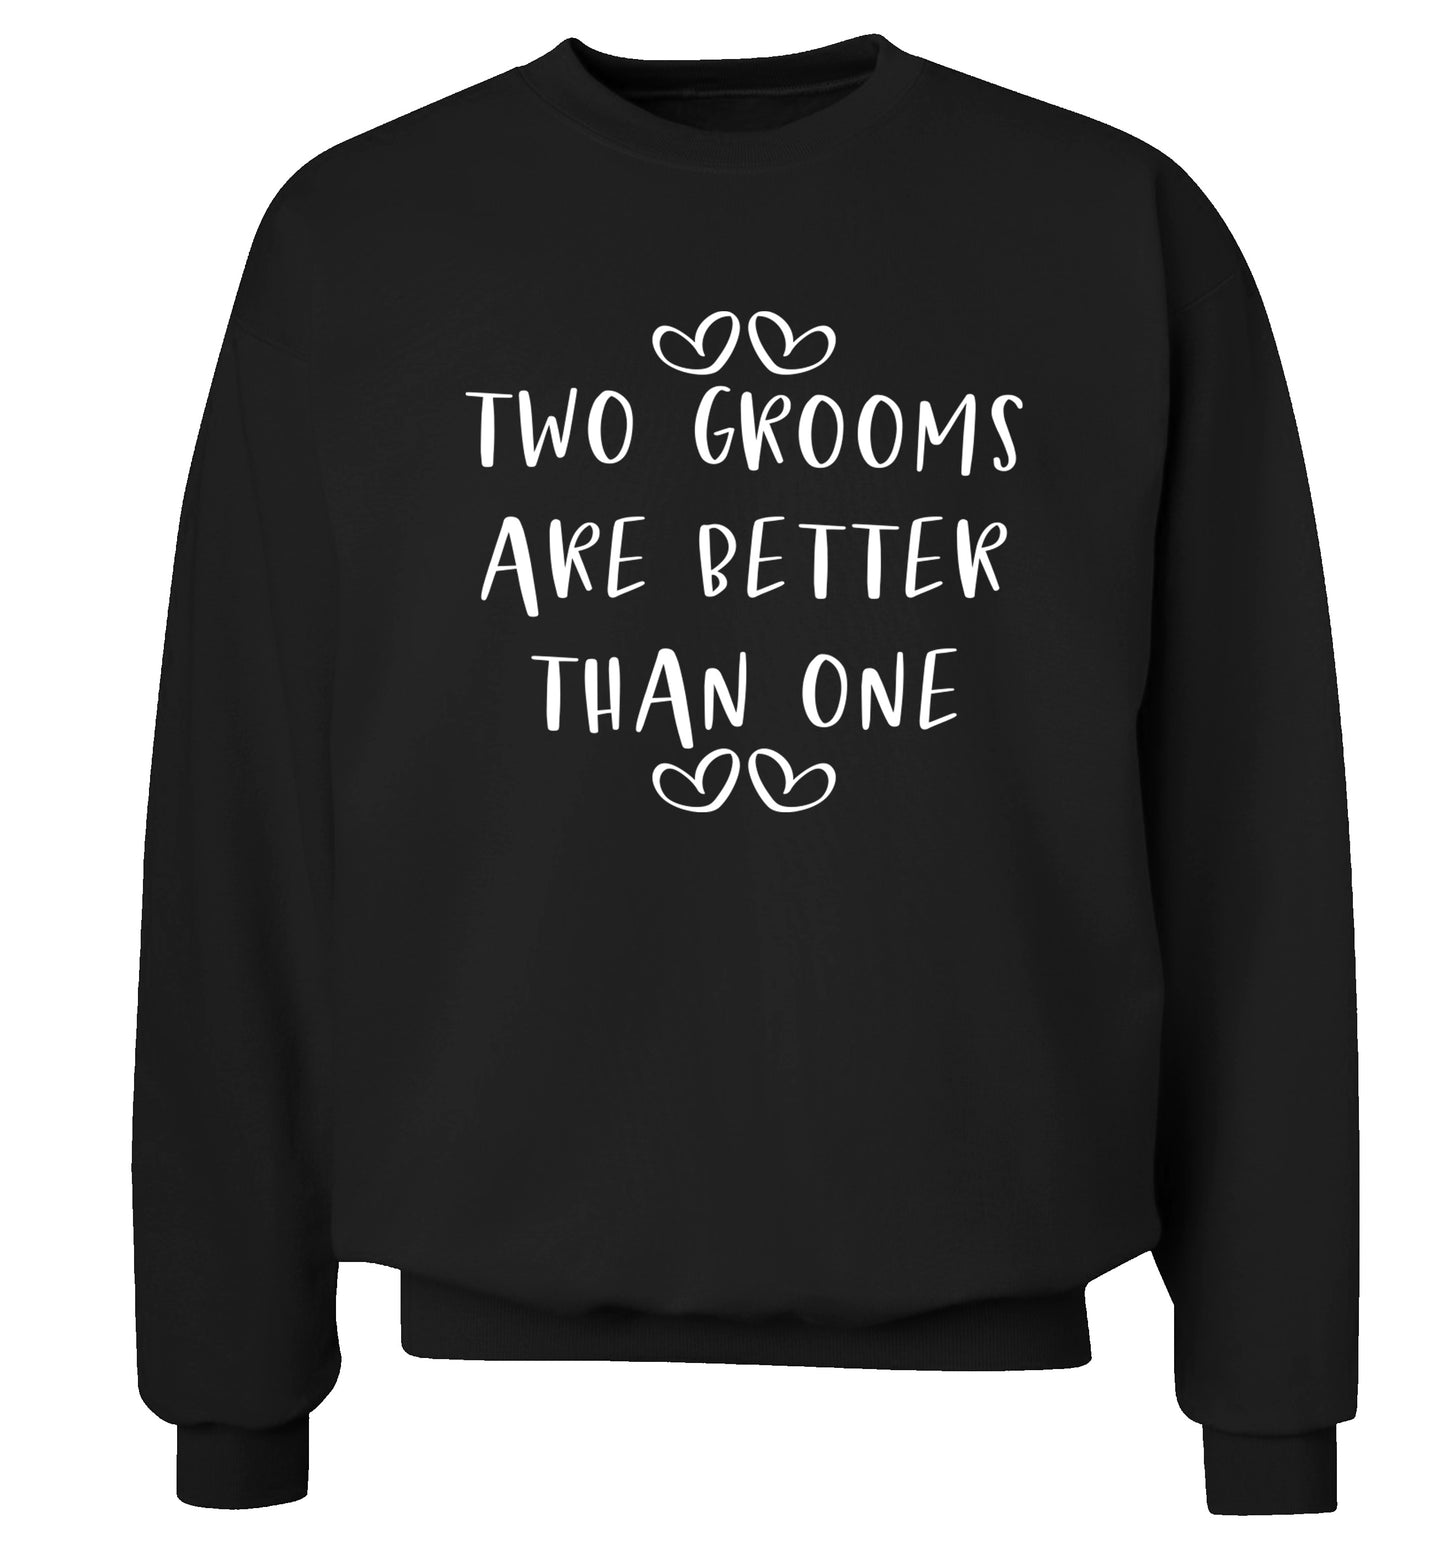 Two grooms are better than one adult's unisex black sweater 2XL